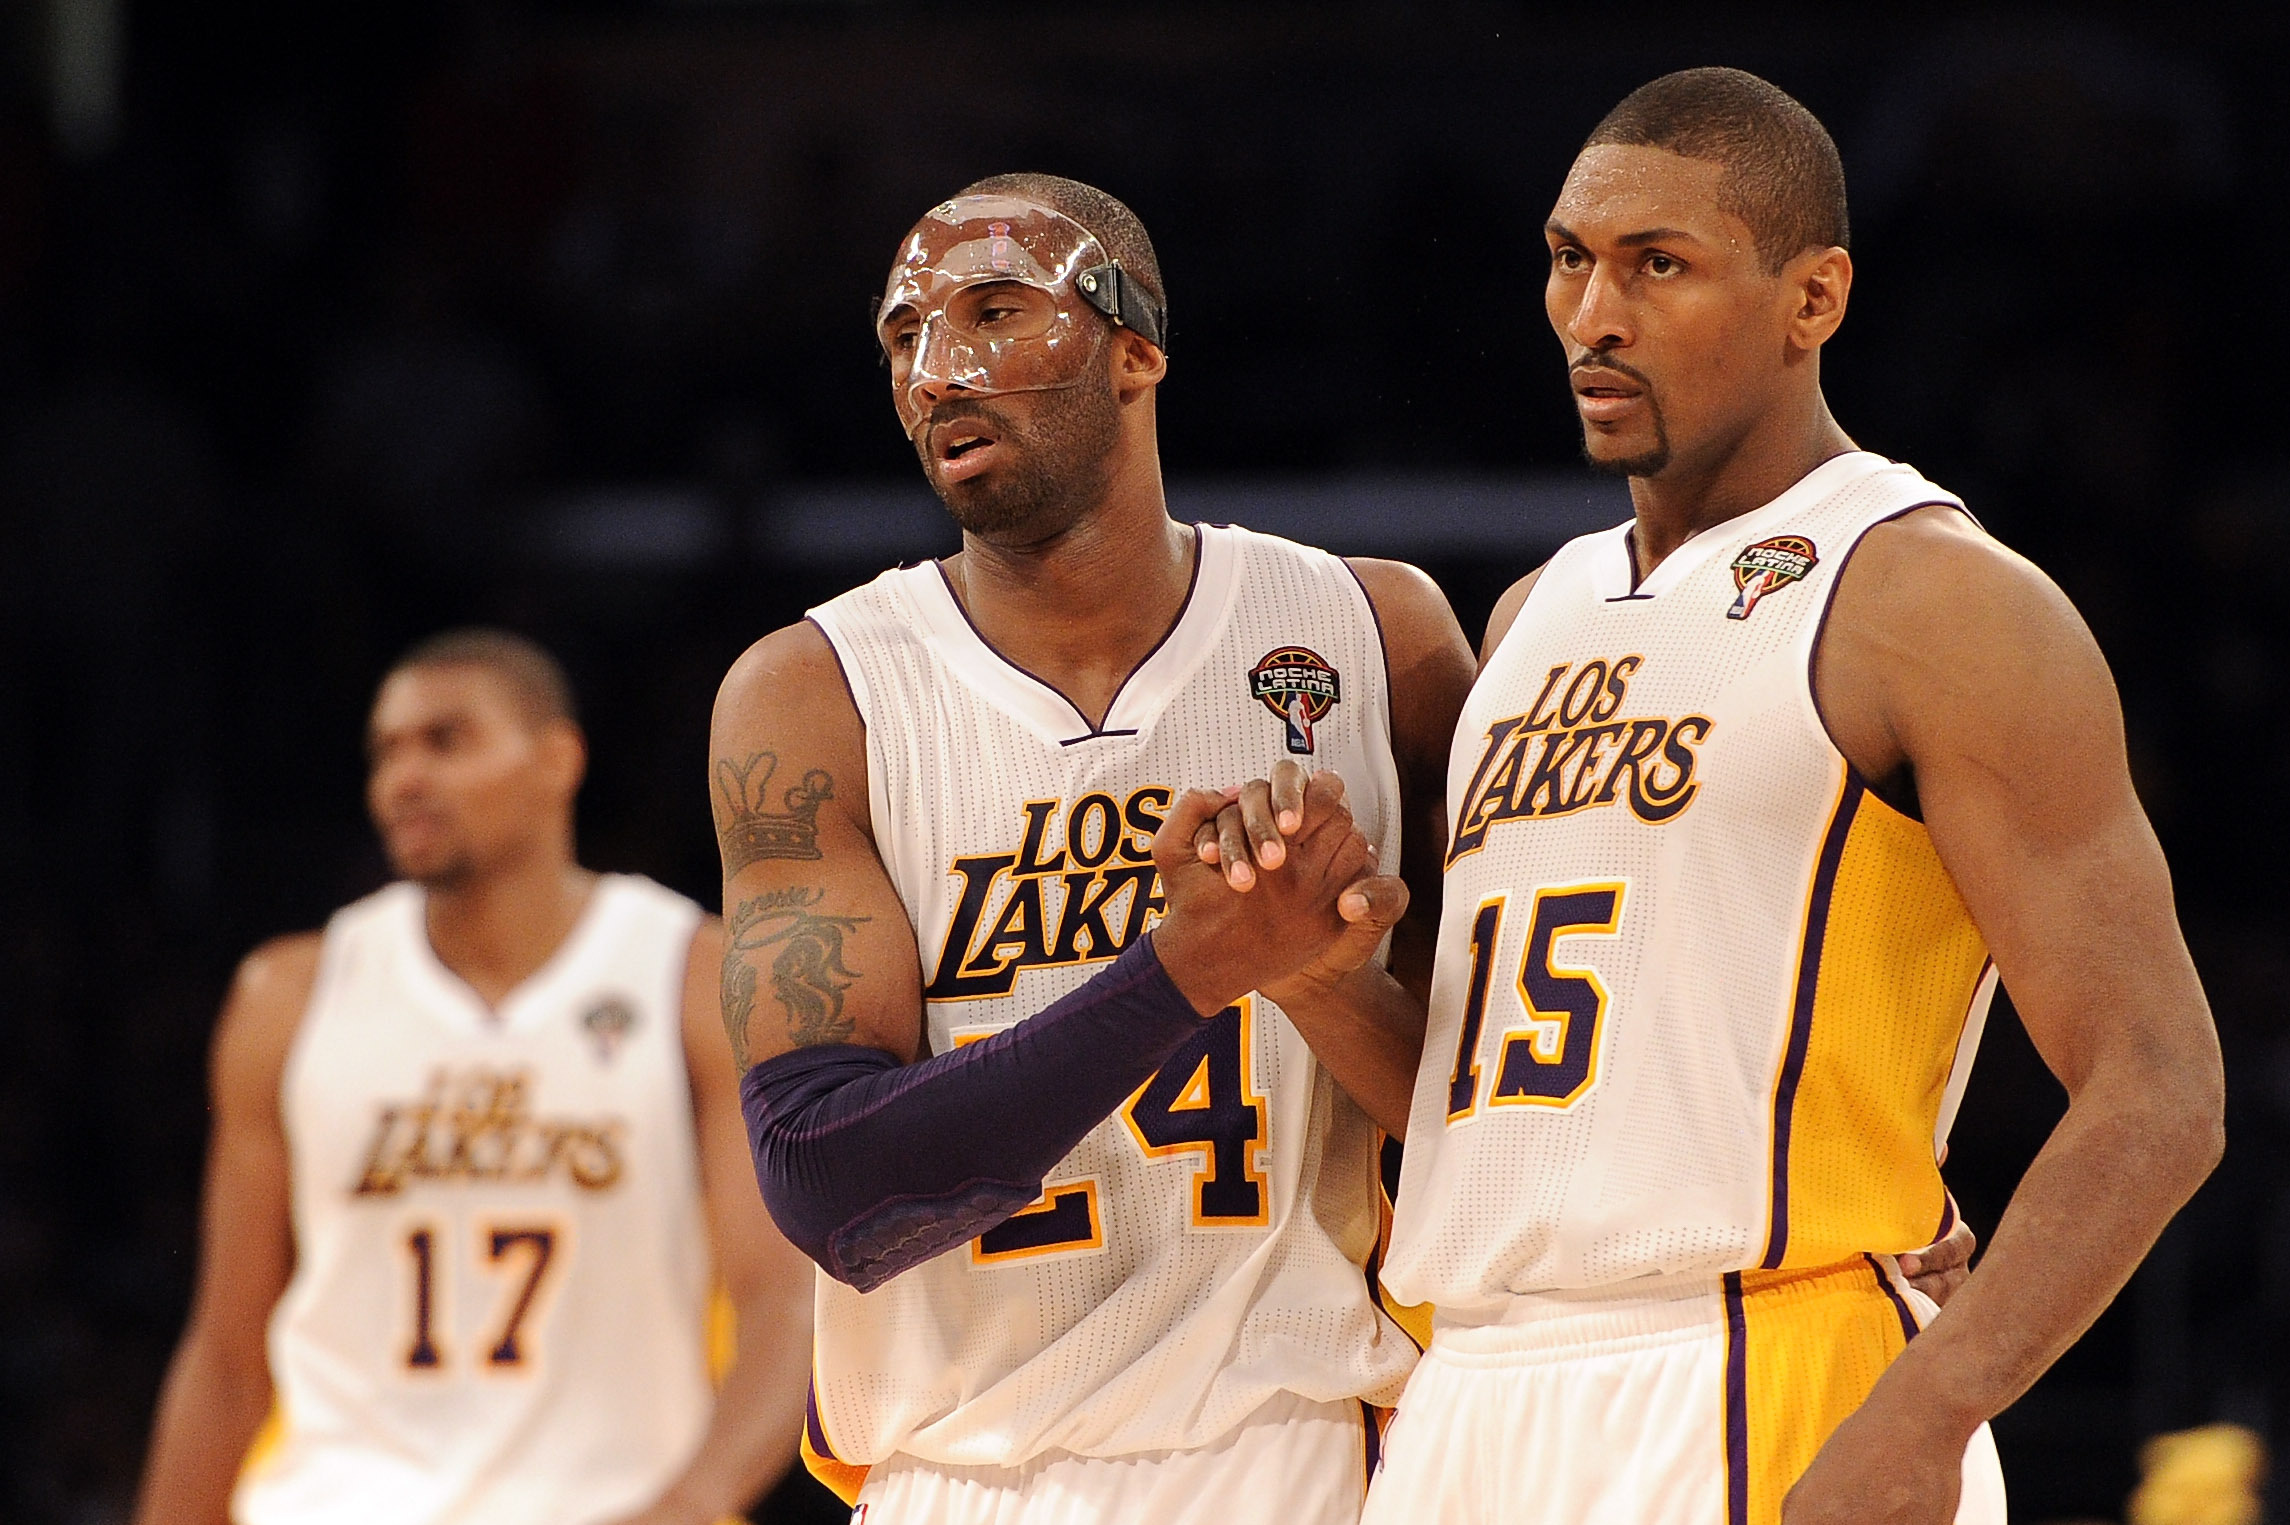 Metta World Peace Comments on Future in NBA, Retirement Timeline